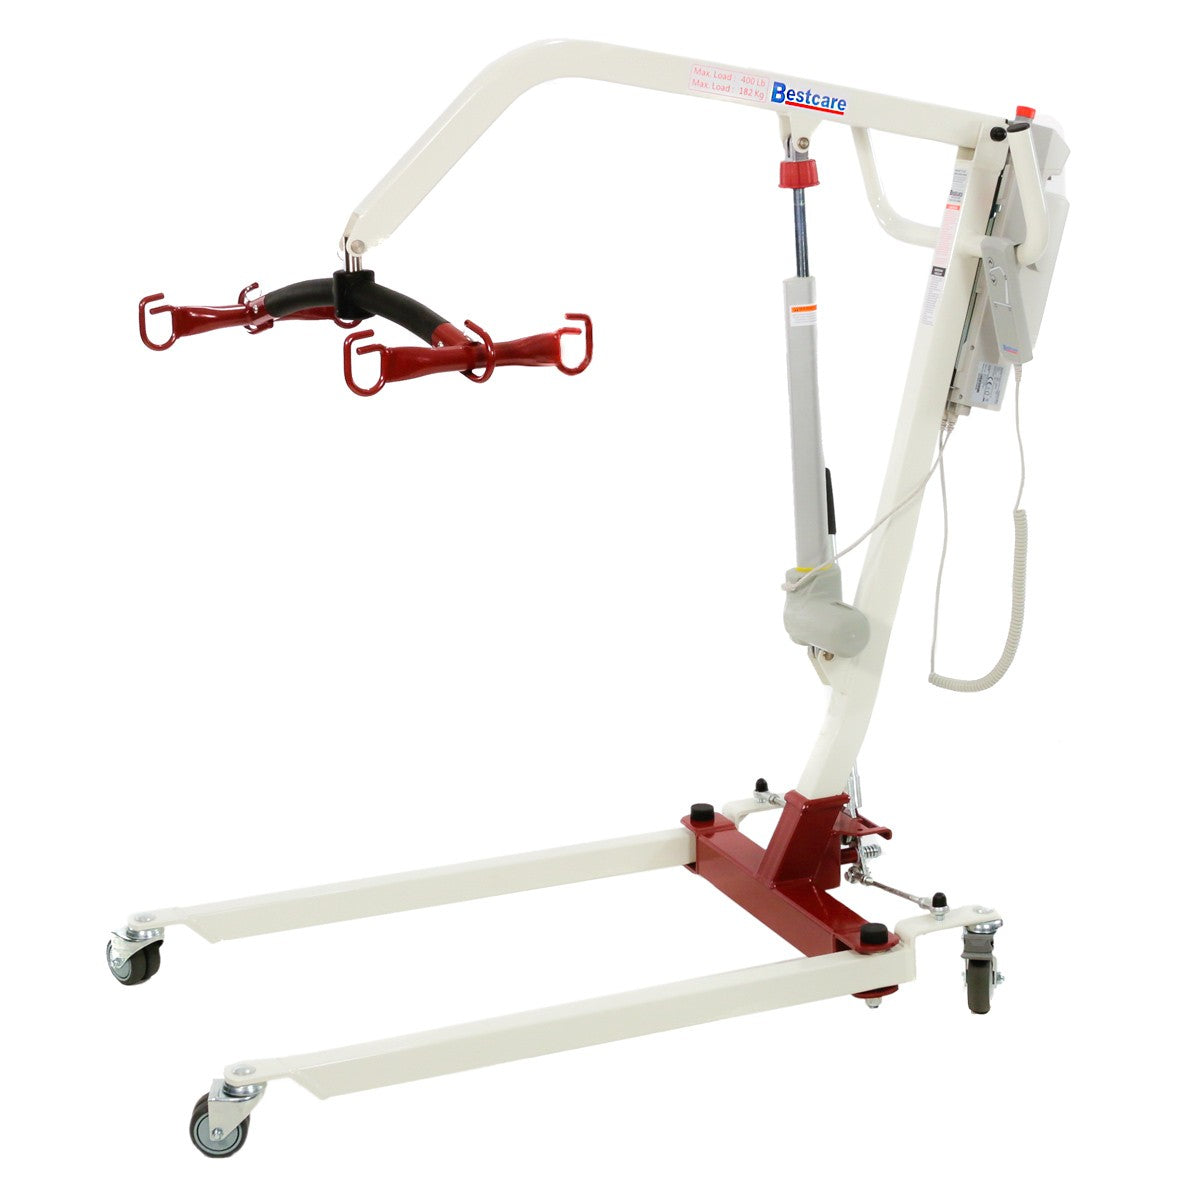 JUST IN! Bestcare BestLift PL228 500lbs Capacity Full Body Patient Lift w Sling!